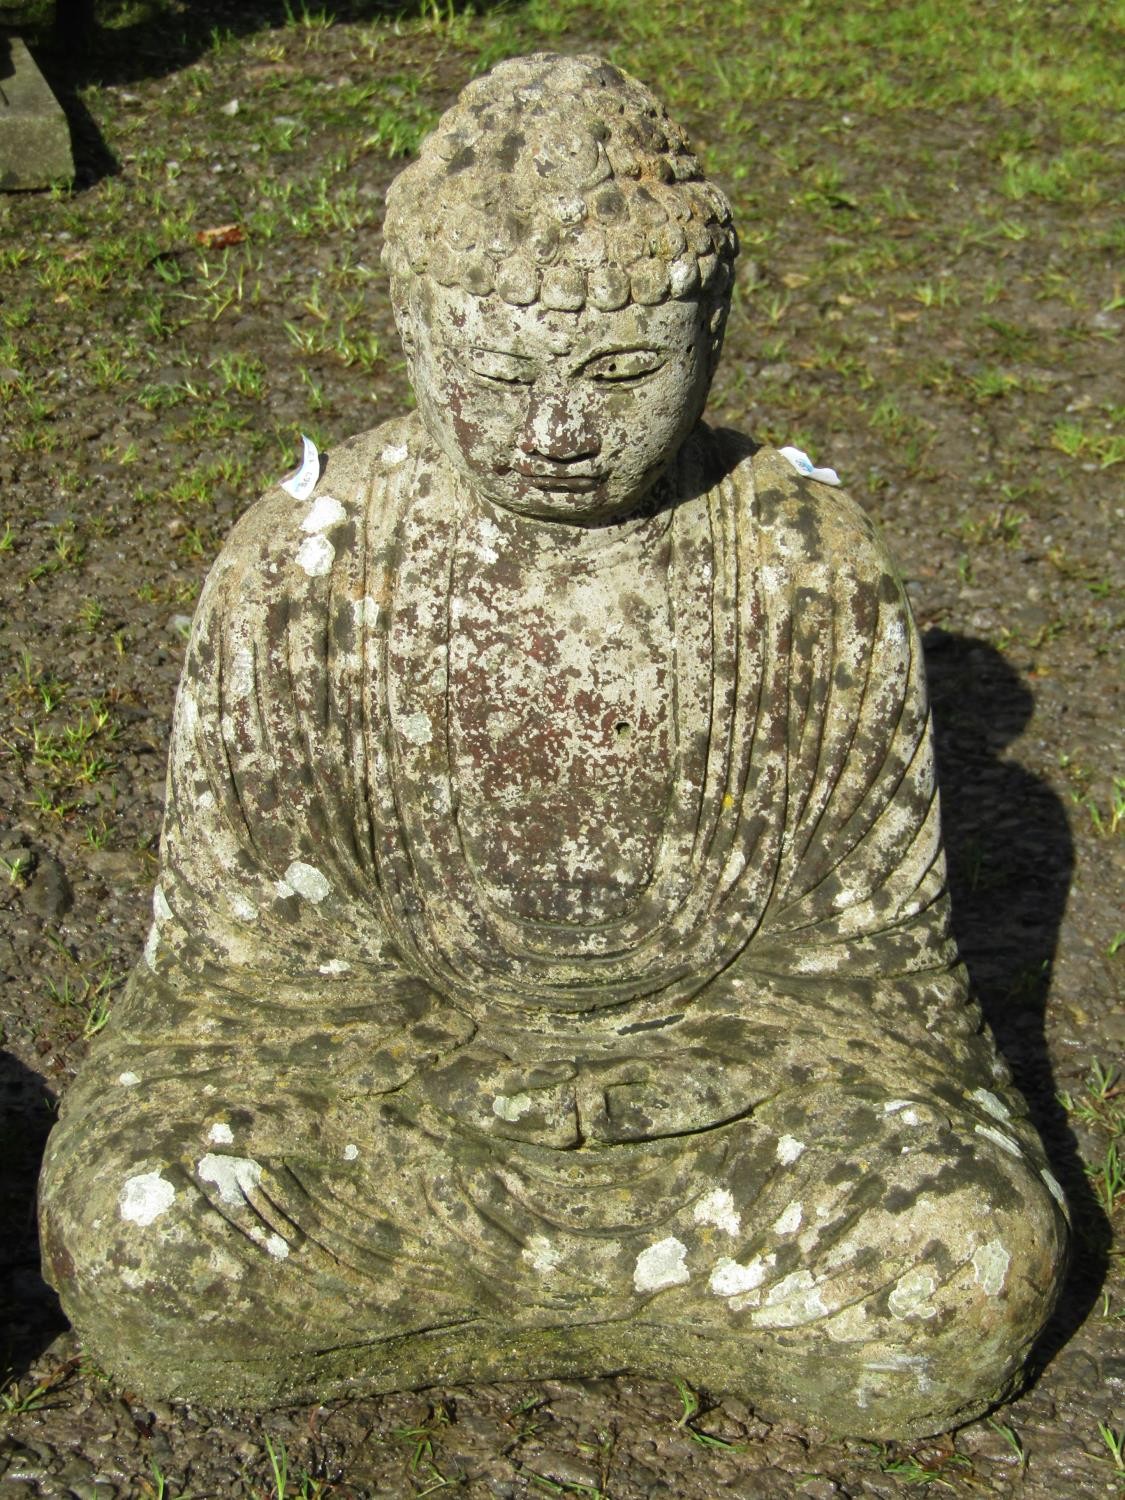 A cast composition stone garden ornament in the form of a seated Buddha in lotus position, raised on - Image 4 of 4